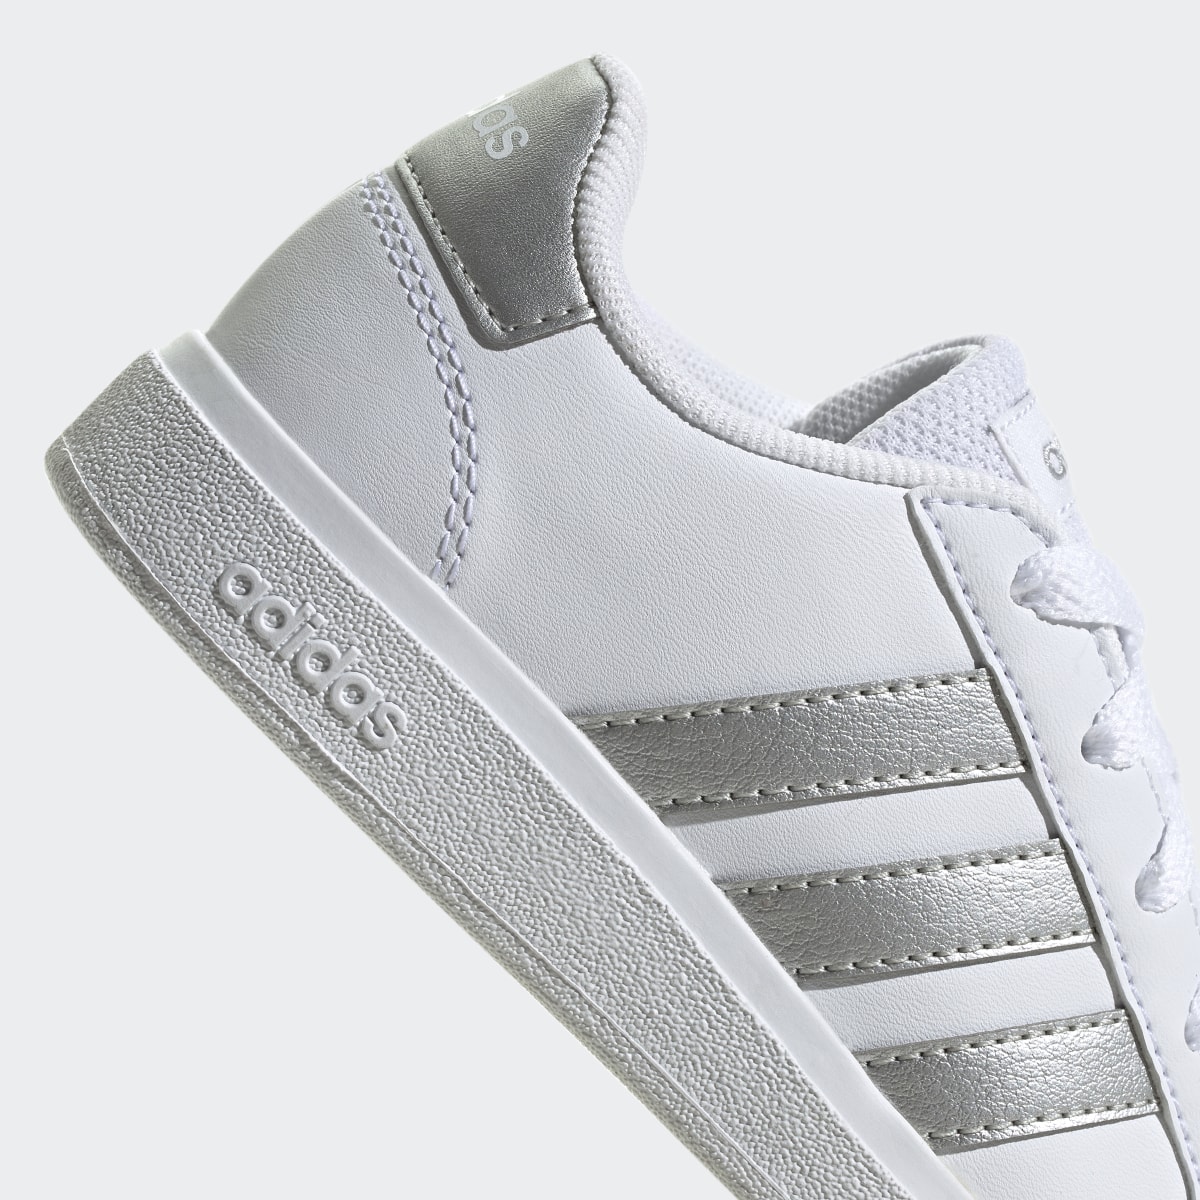 Adidas Grand Court Lifestyle Tennis Lace-Up Schuh. 10